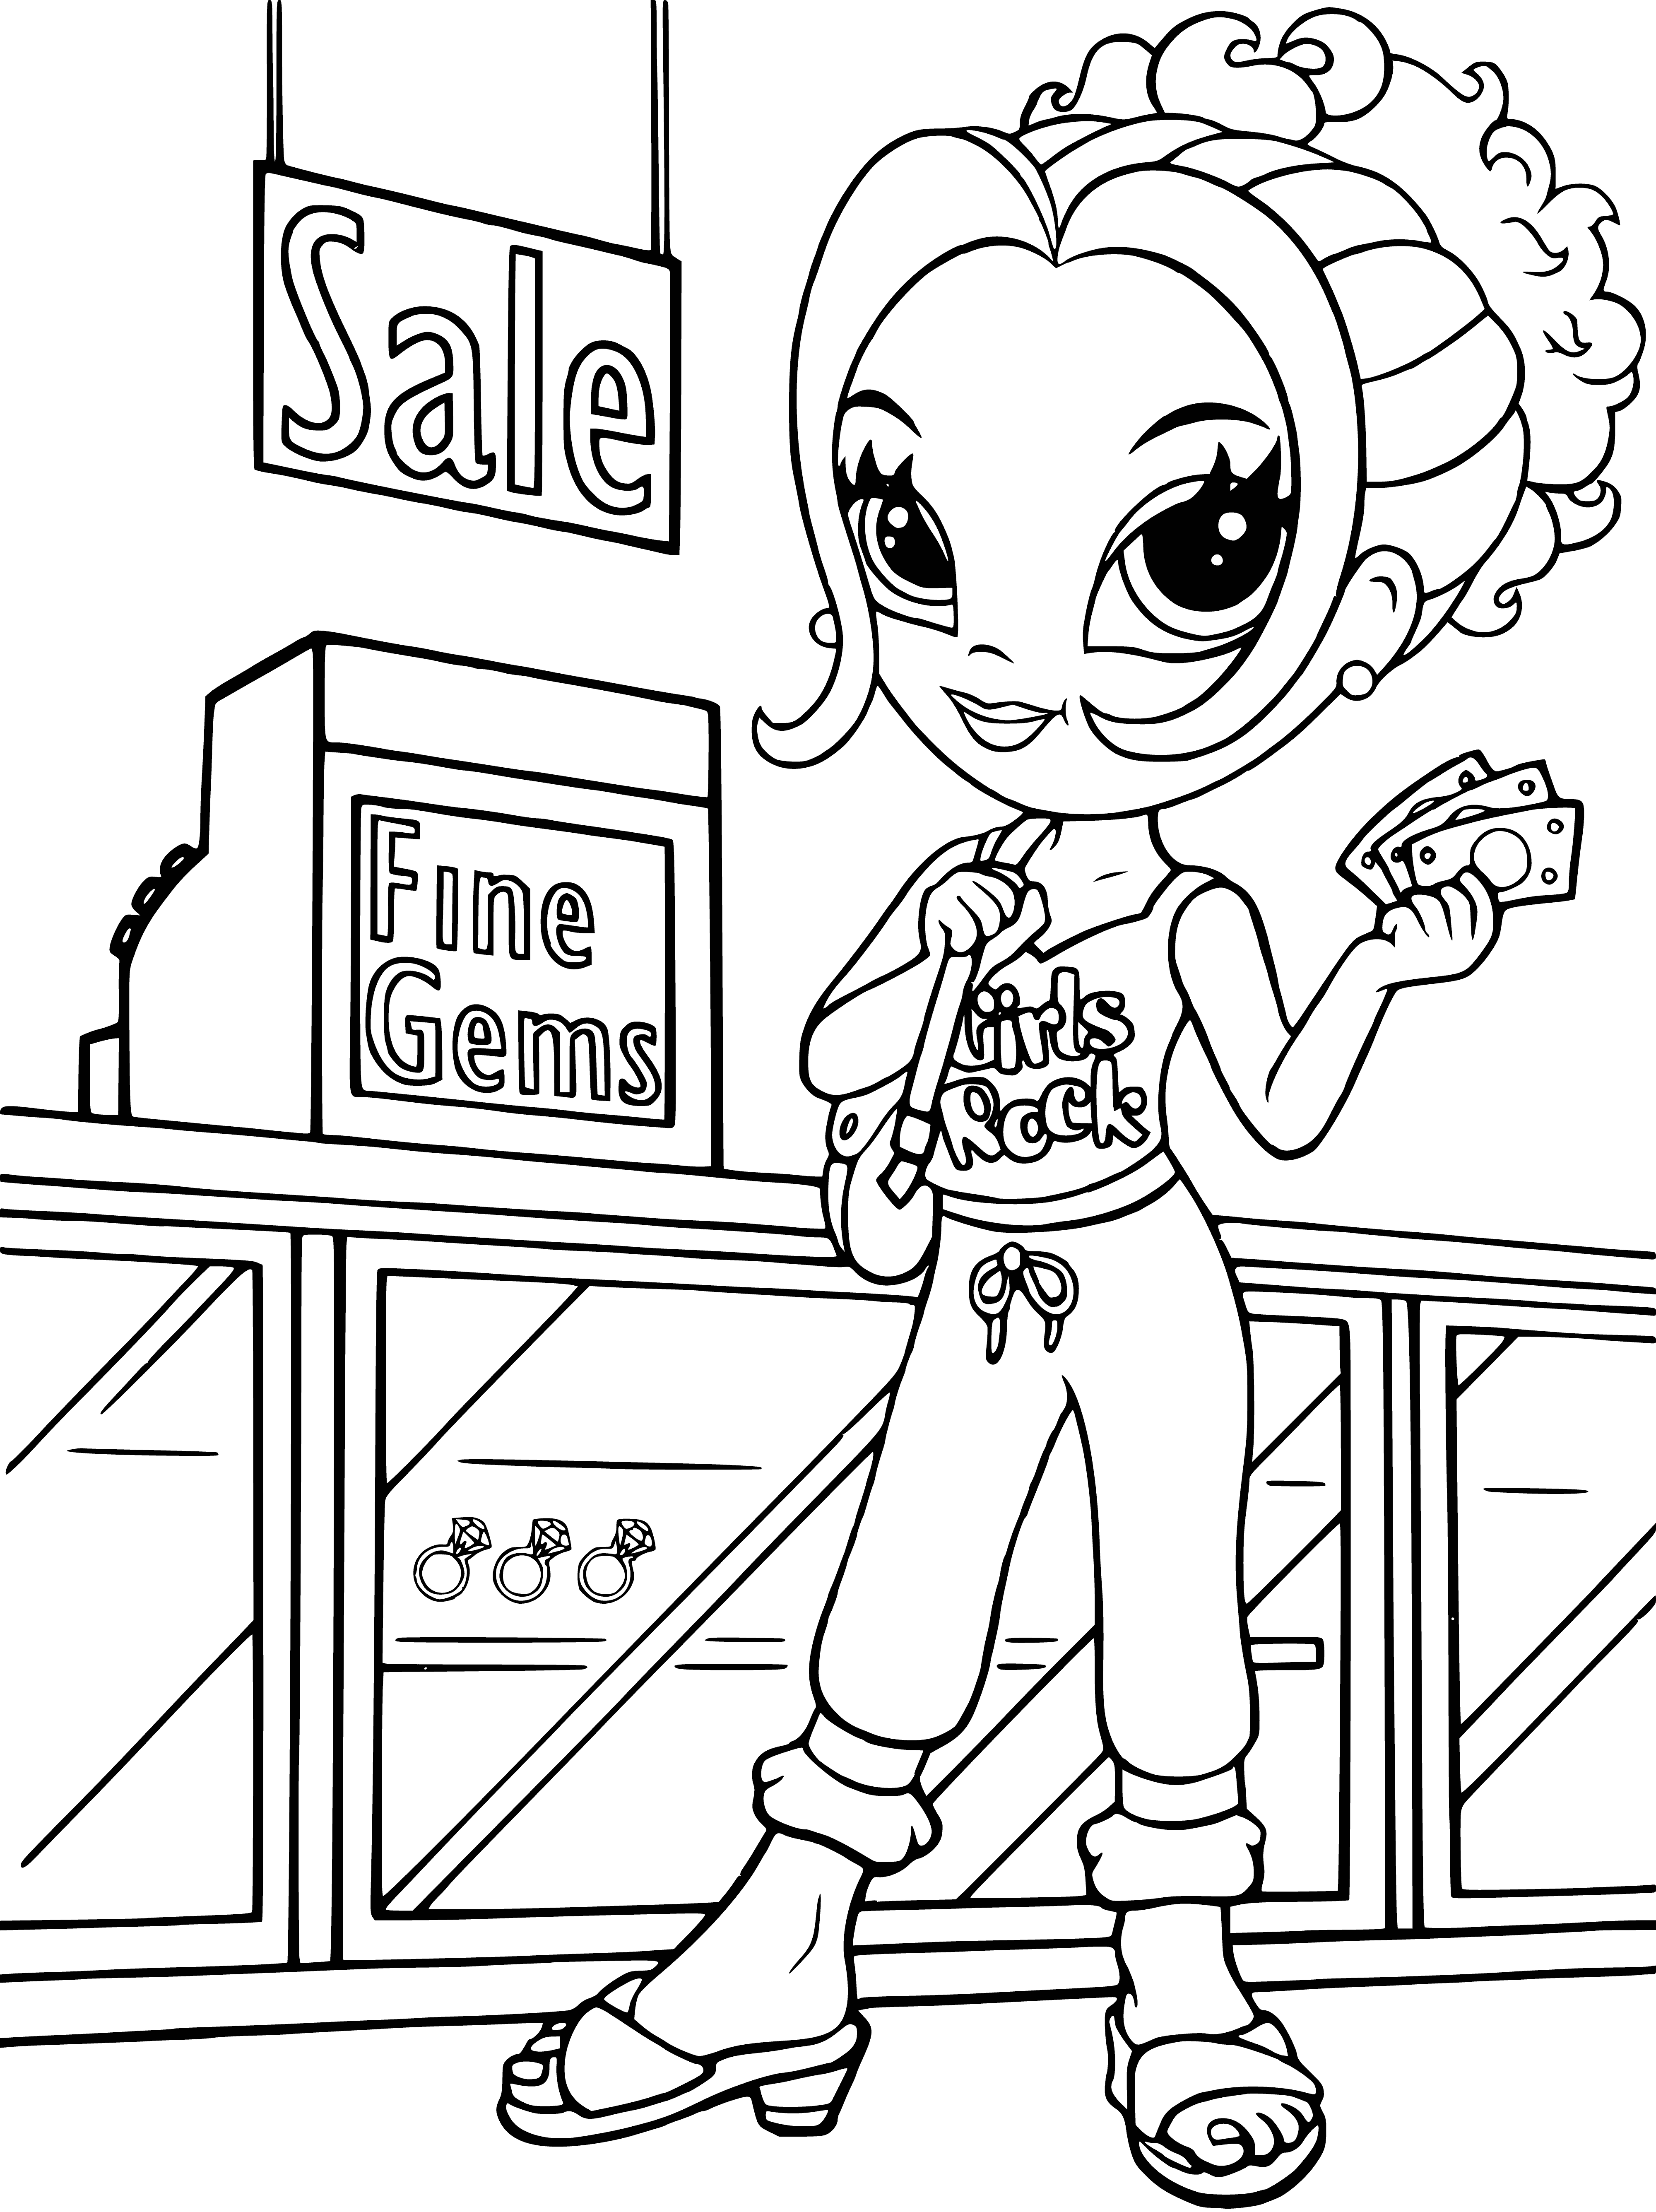 coloring page: Girl with blonde hair and blue eyes stands in front of mirror, looking at herself wearing pink dress, bow in hair, holding pink rose and purse.